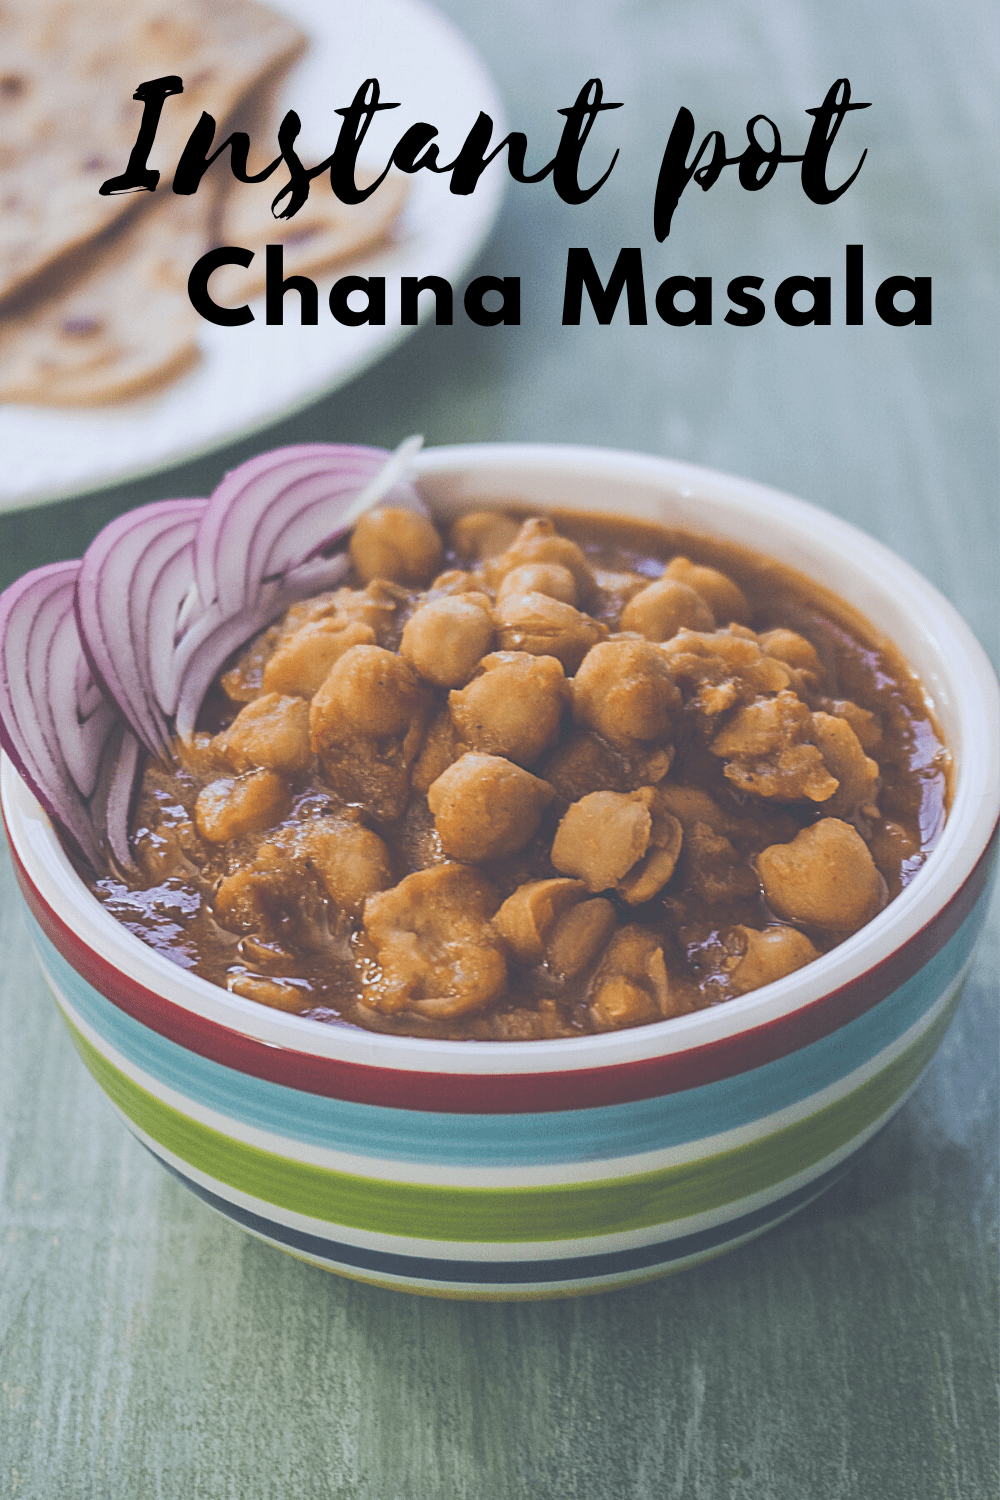 Chana masala in a bowl with garnish of onions with text on the image for pinterest